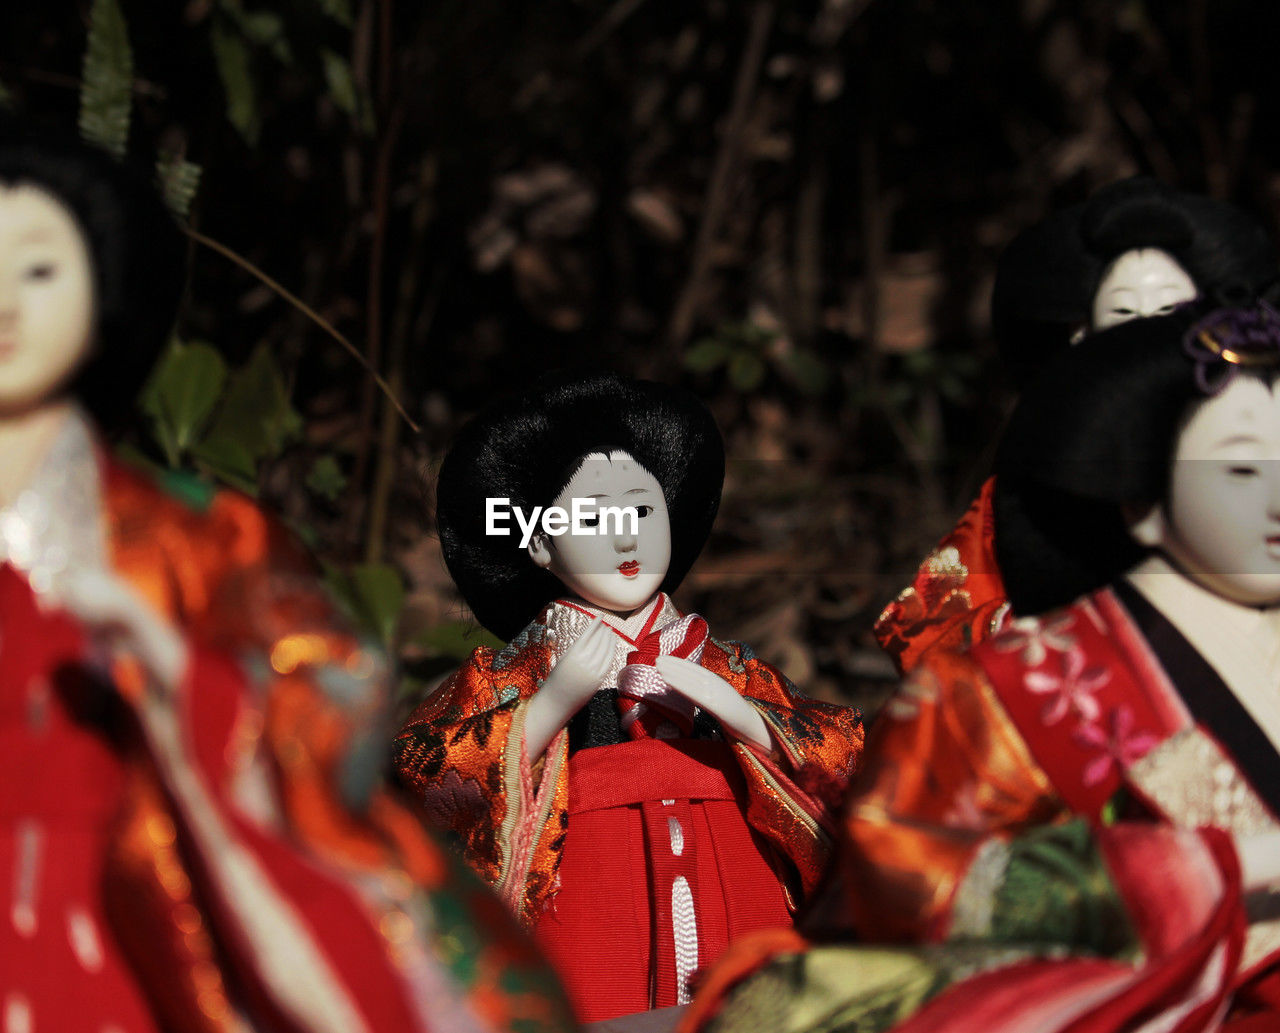 human representation, doll, representation, red, toy, culture, male likeness, tradition, female, selective focus, celebration, no people, clothing, traditional clothing, creativity, figurine, disguise, costume, mask - disguise, outdoors, spooky